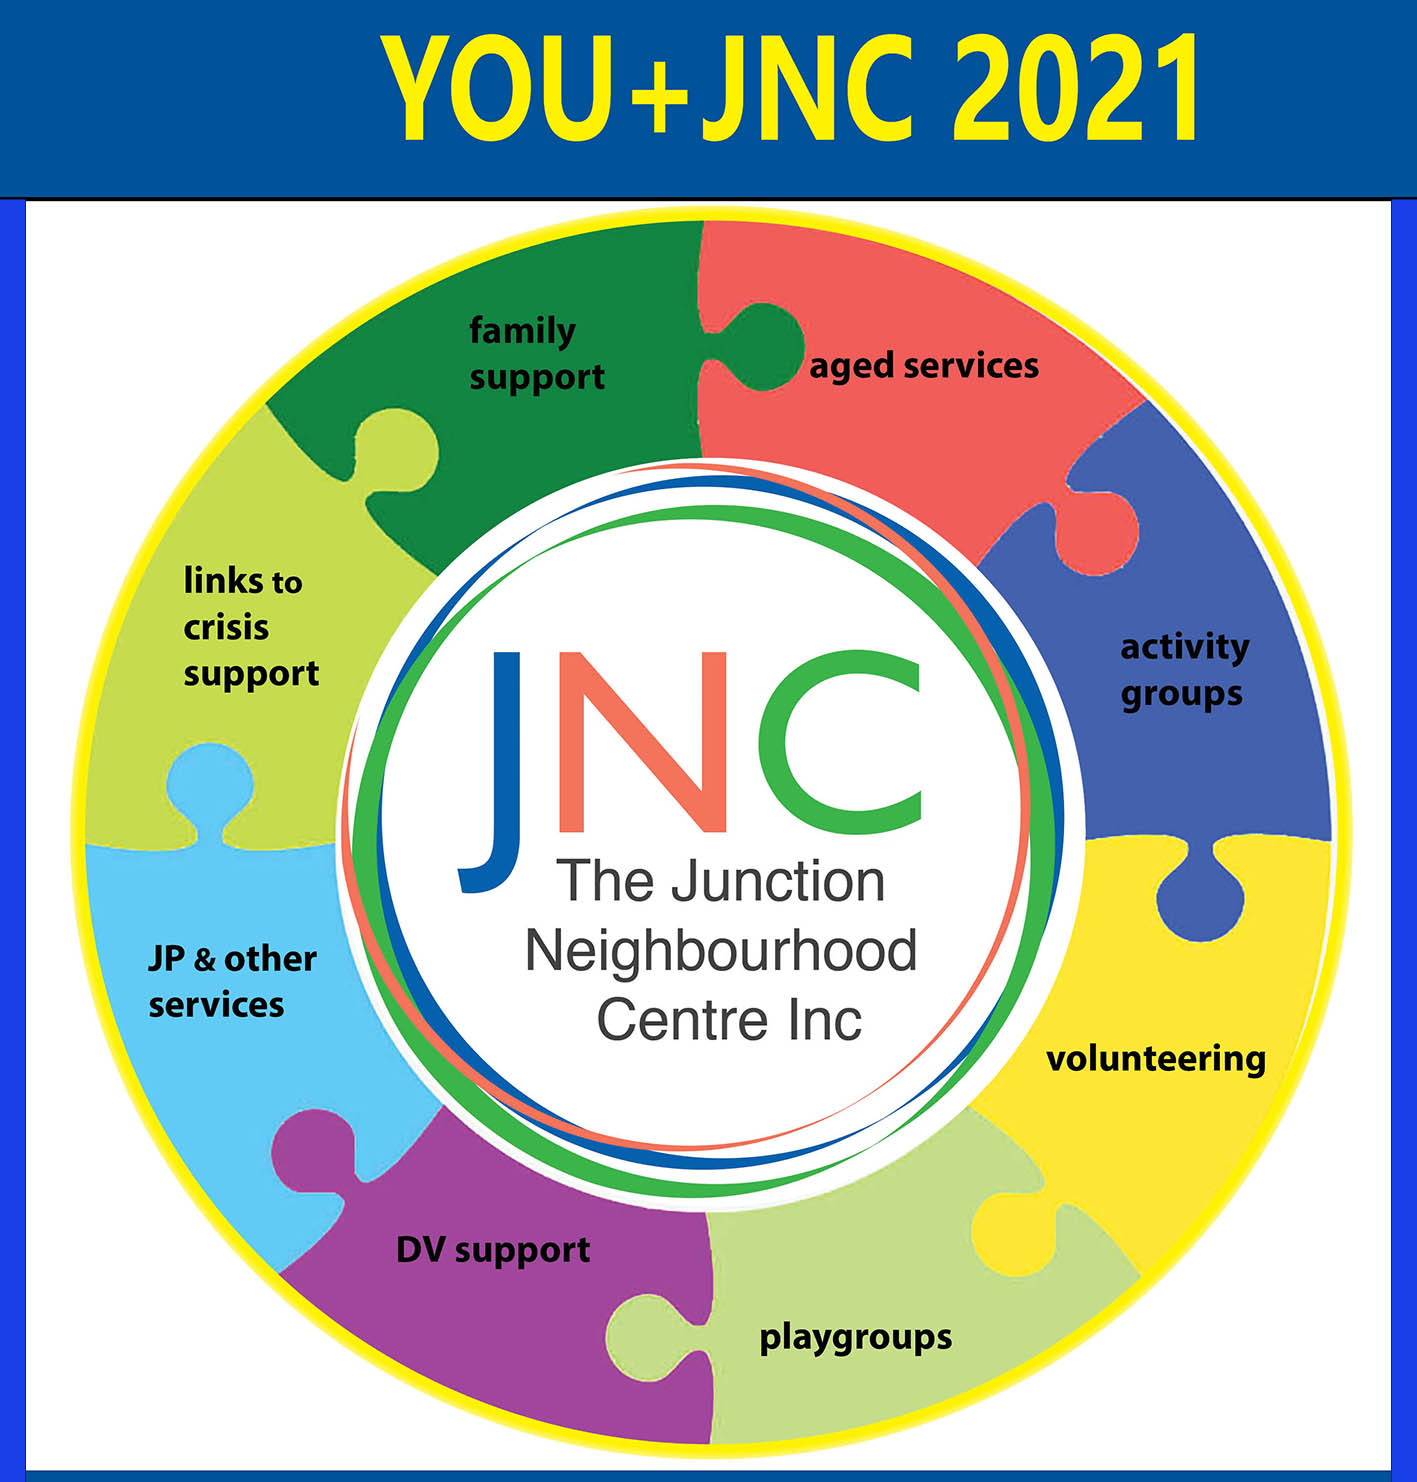 poster with JNC logo and words You + JNC 2021